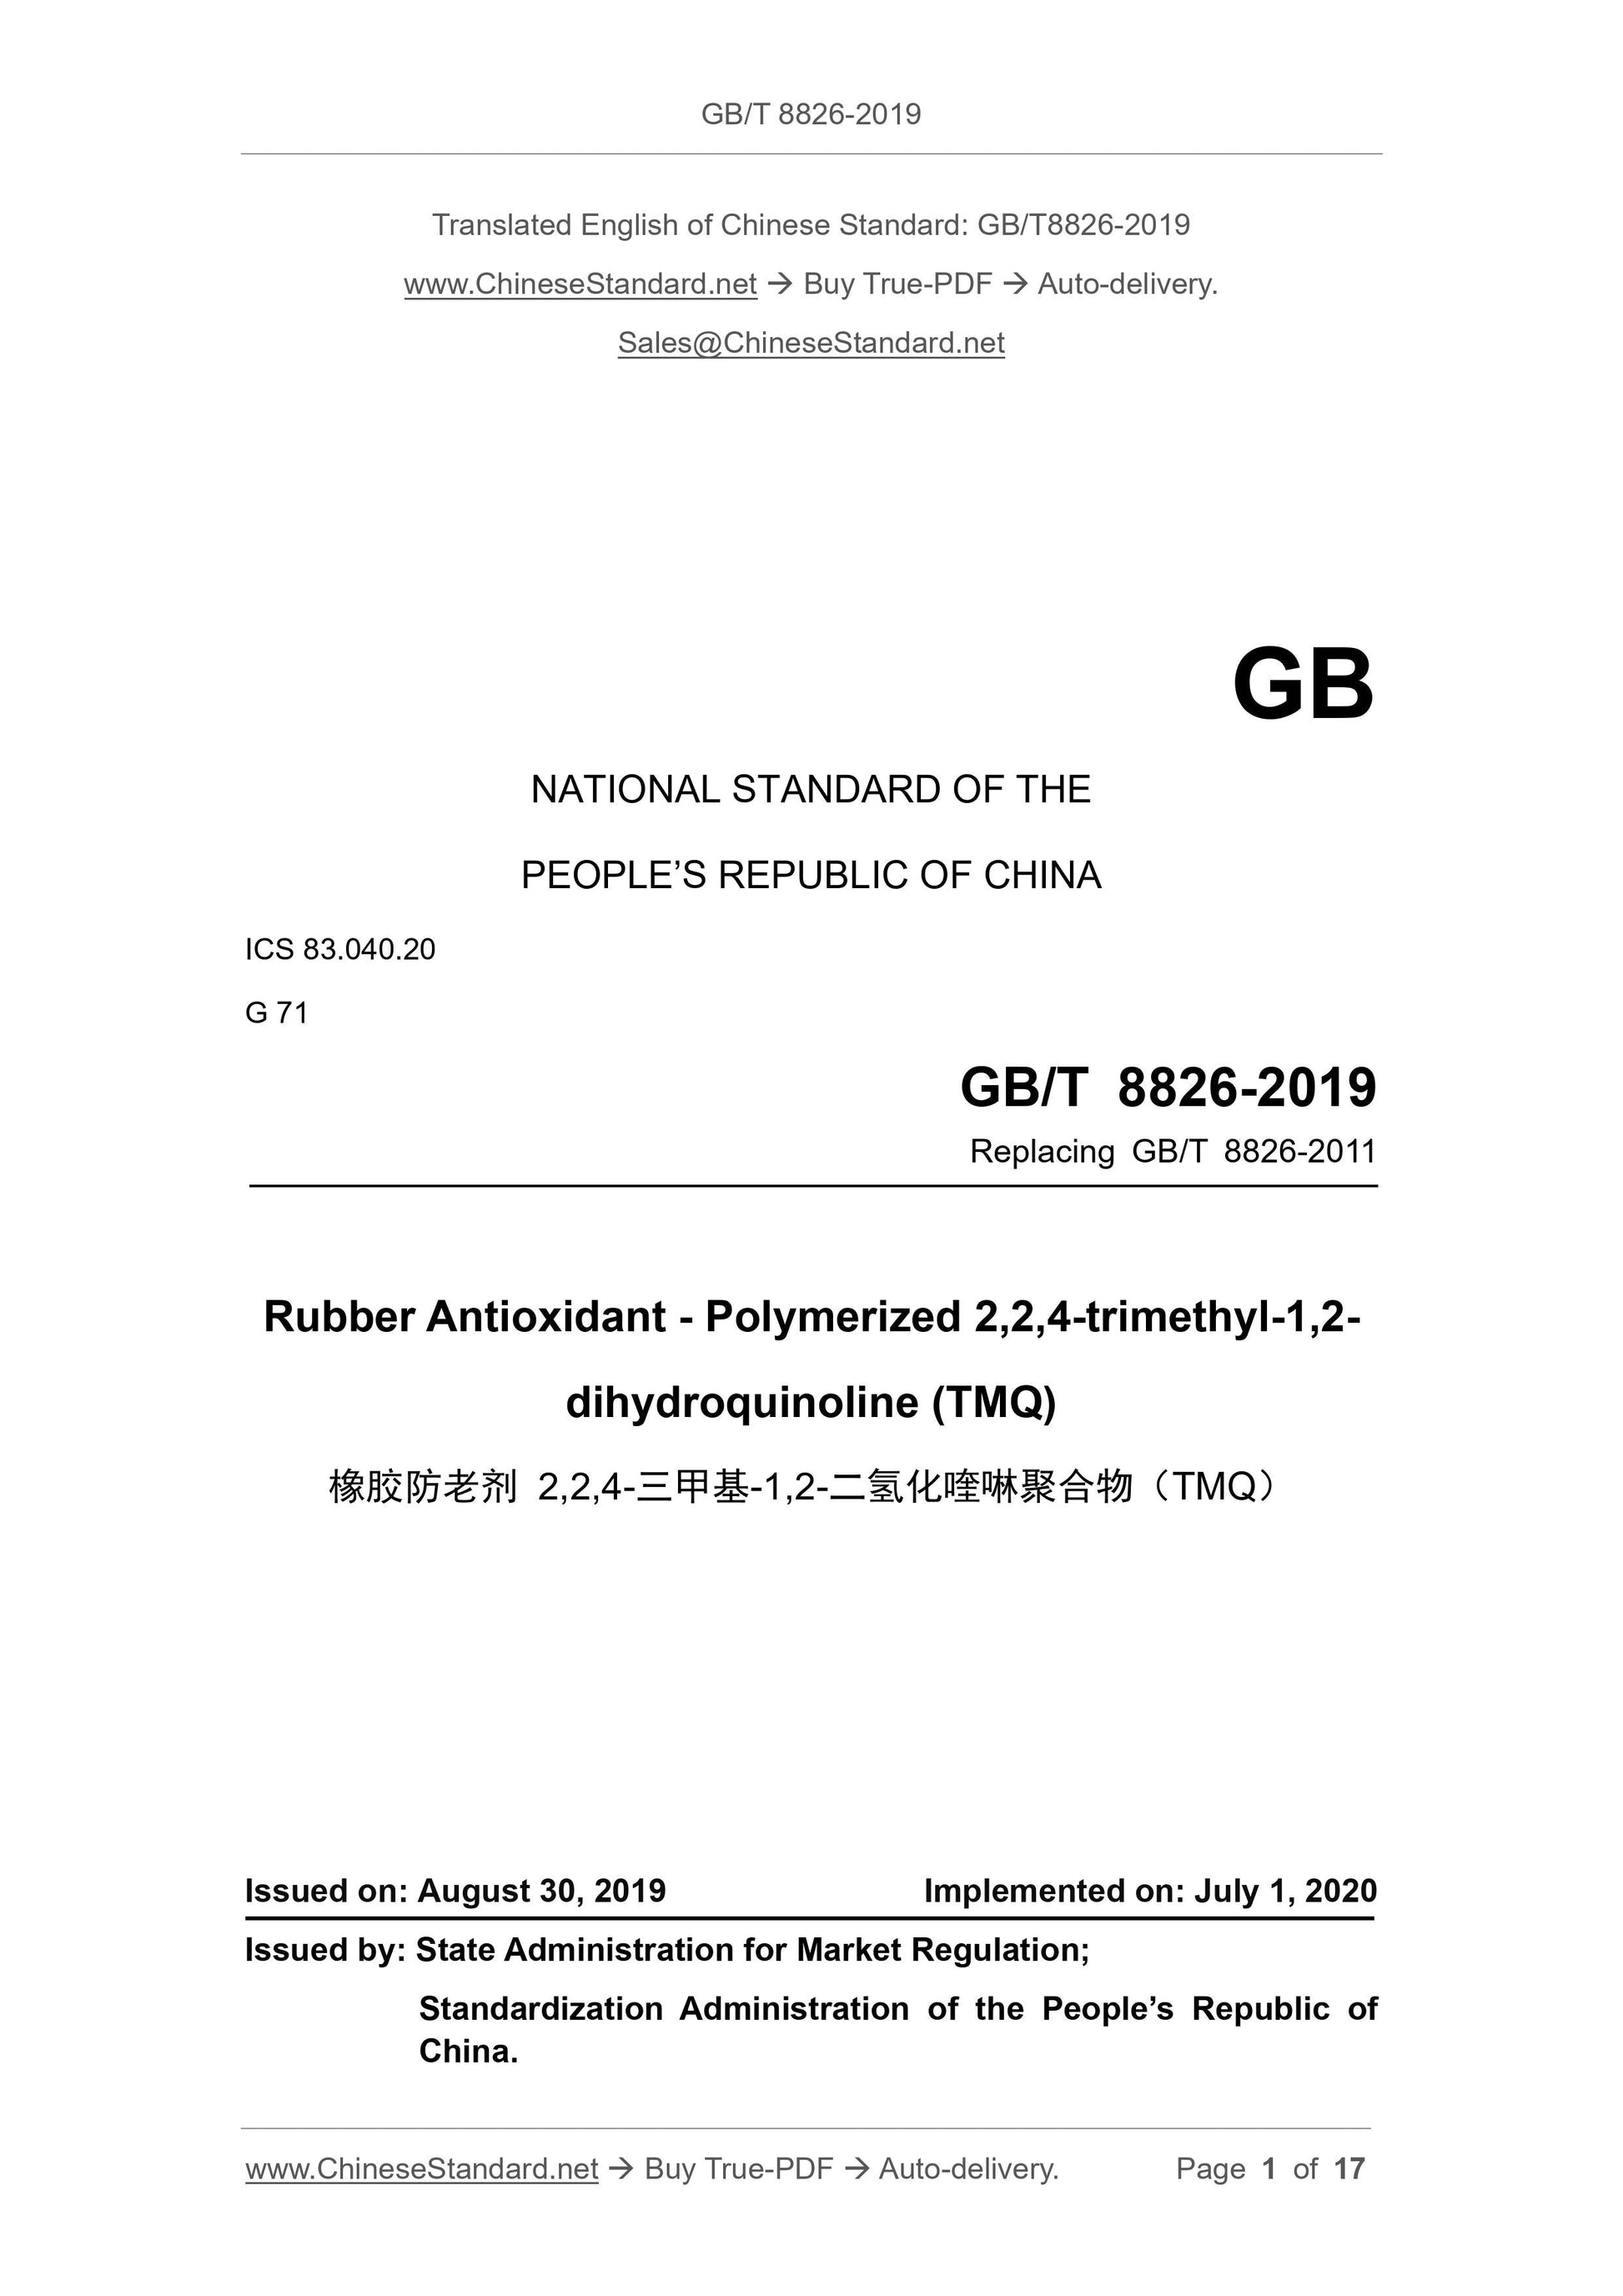 GB/T 8826-2019 Page 1